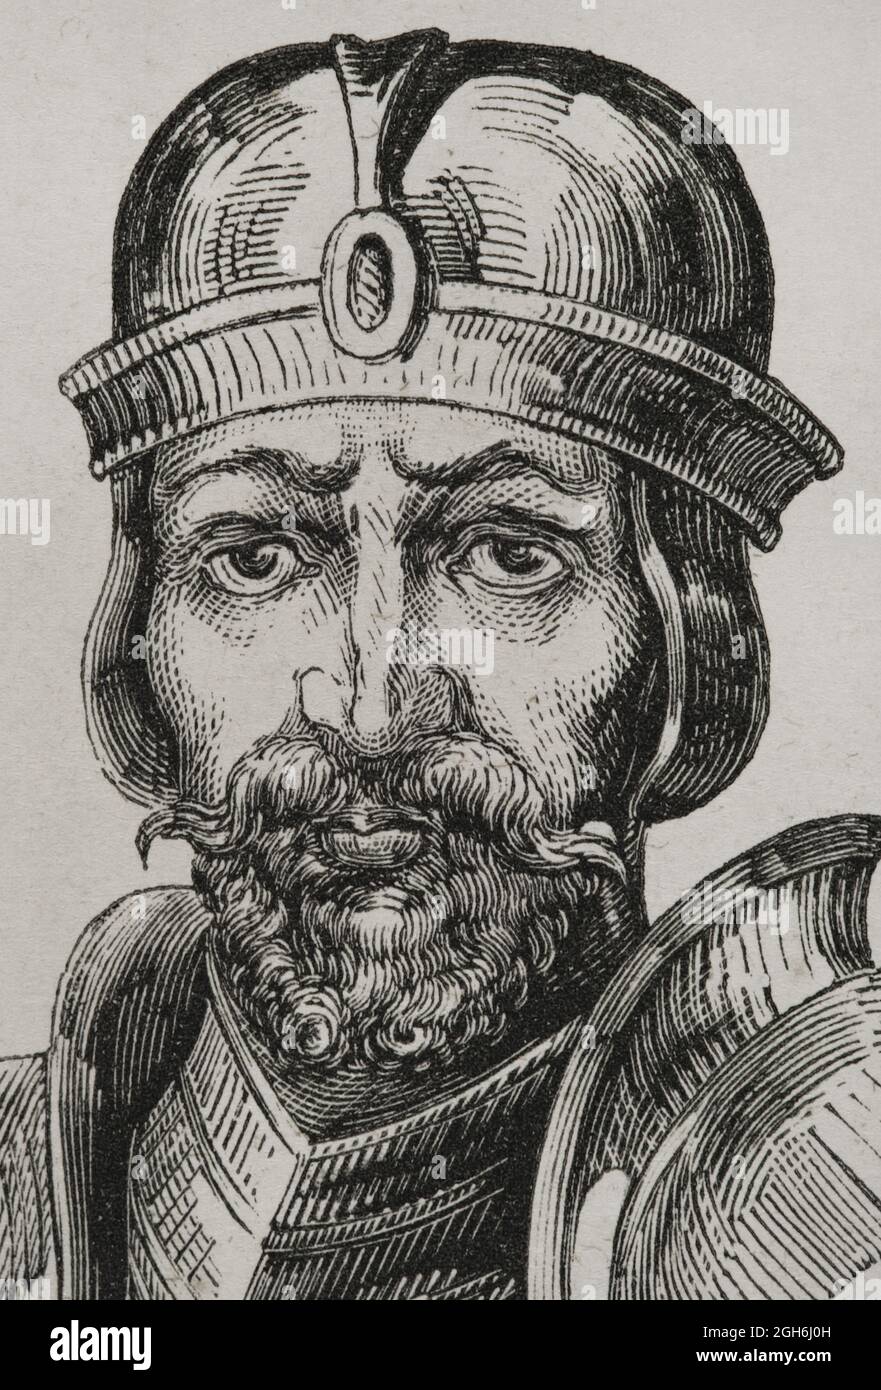 Roderick (Rodrigo). The last Visigothic king (710 to 711). He lost the throne when the Iberian Peninsula was invaded by the Muslims. Portrait. Engraving. Las Glorias Nacionales. Volume II, Madrid-Barcelona edition, 1853. Stock Photo